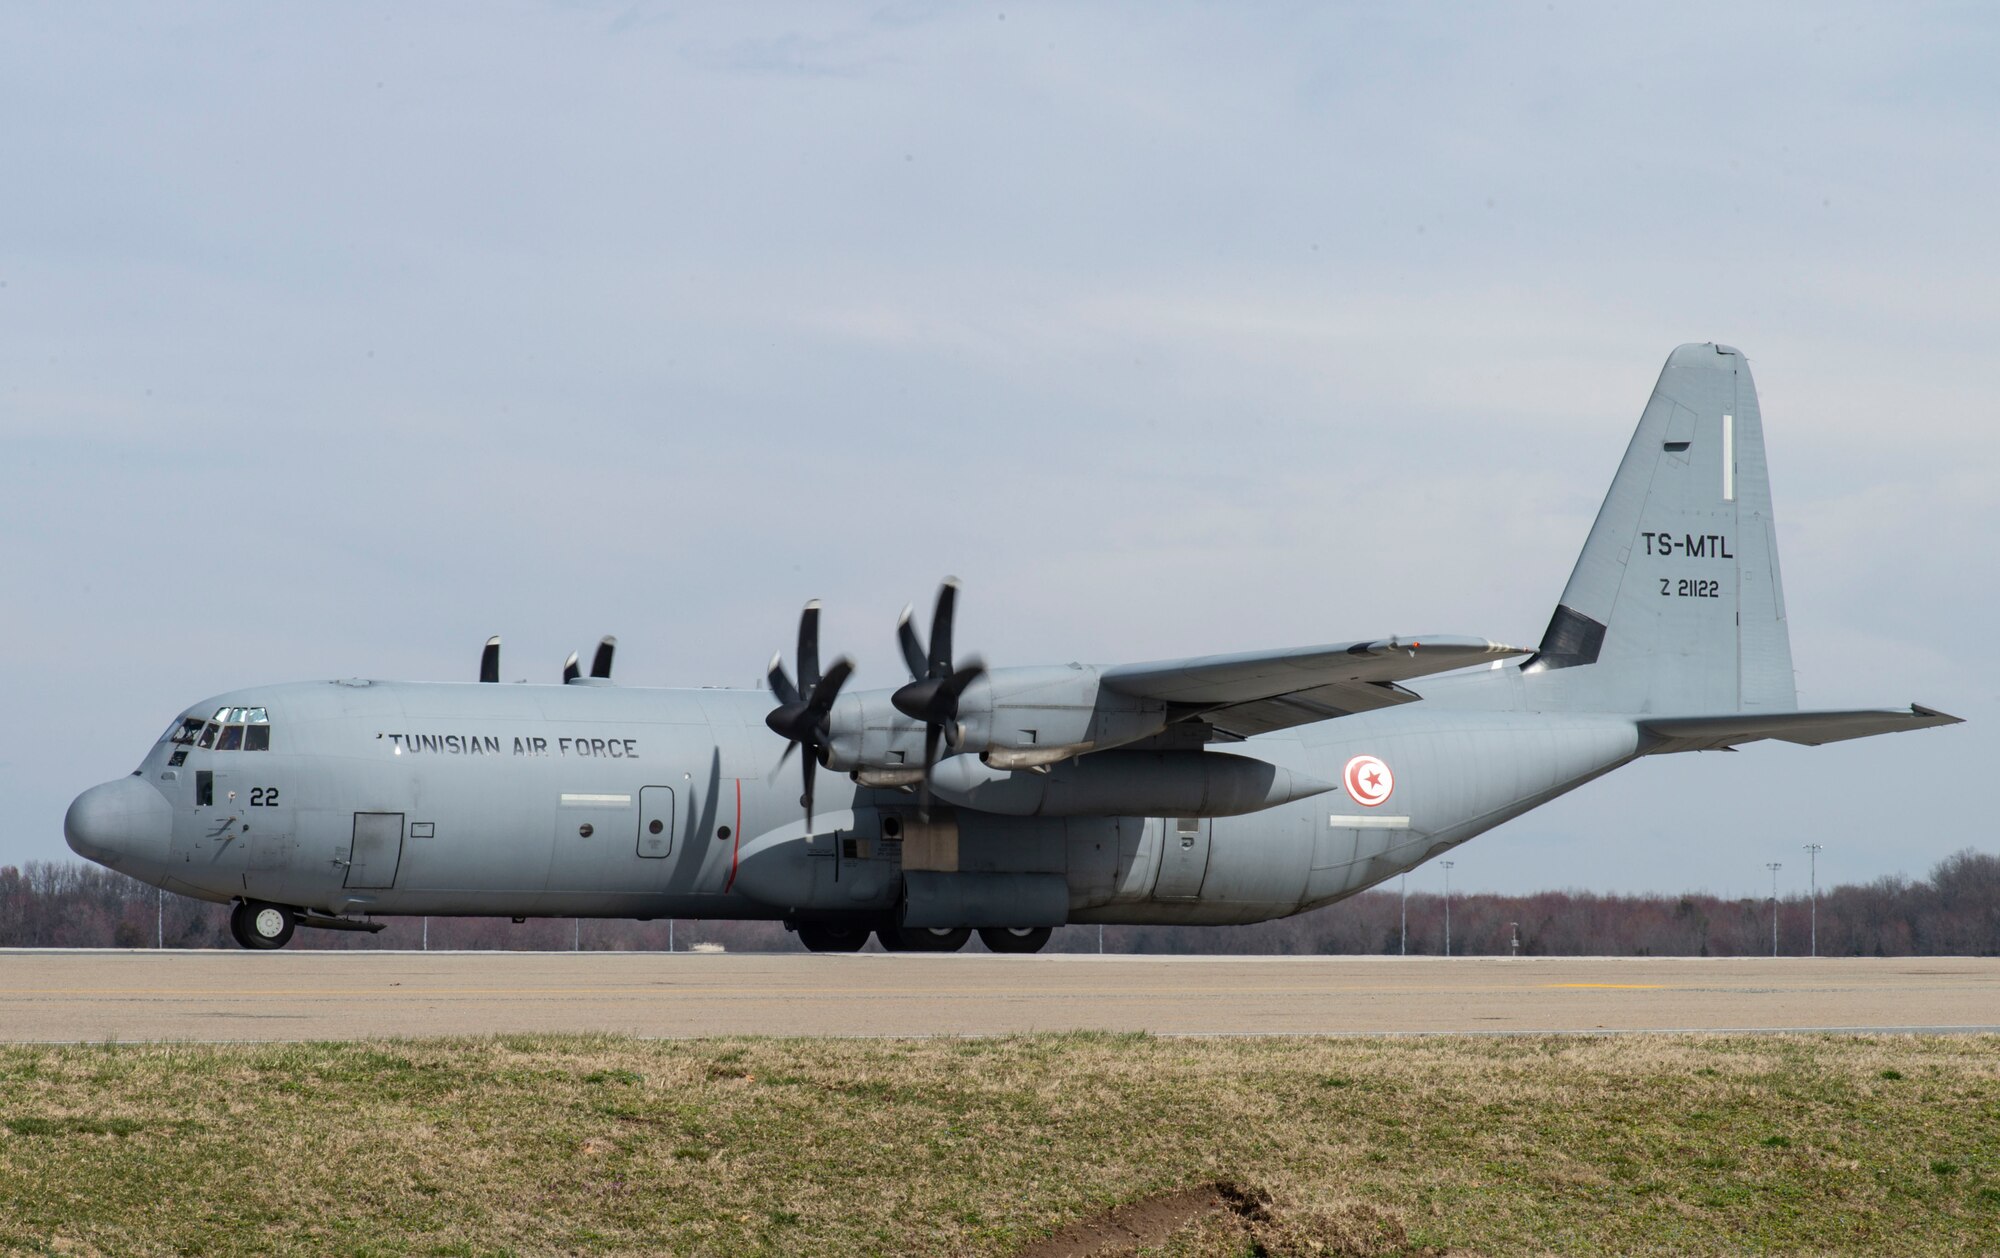 A Tunisian air force C-130J Super Hercules taxis to a parking spot after landing at Dover Air Force Base, Delaware, March 10, 2022. The U.S. and Tunisia have enjoyed strong diplomatic relations for over 200 years, beginning when the two countries signed the Treaty of Peace and Friendship in 1797. (U.S. Air Force photo by Roland Balik)